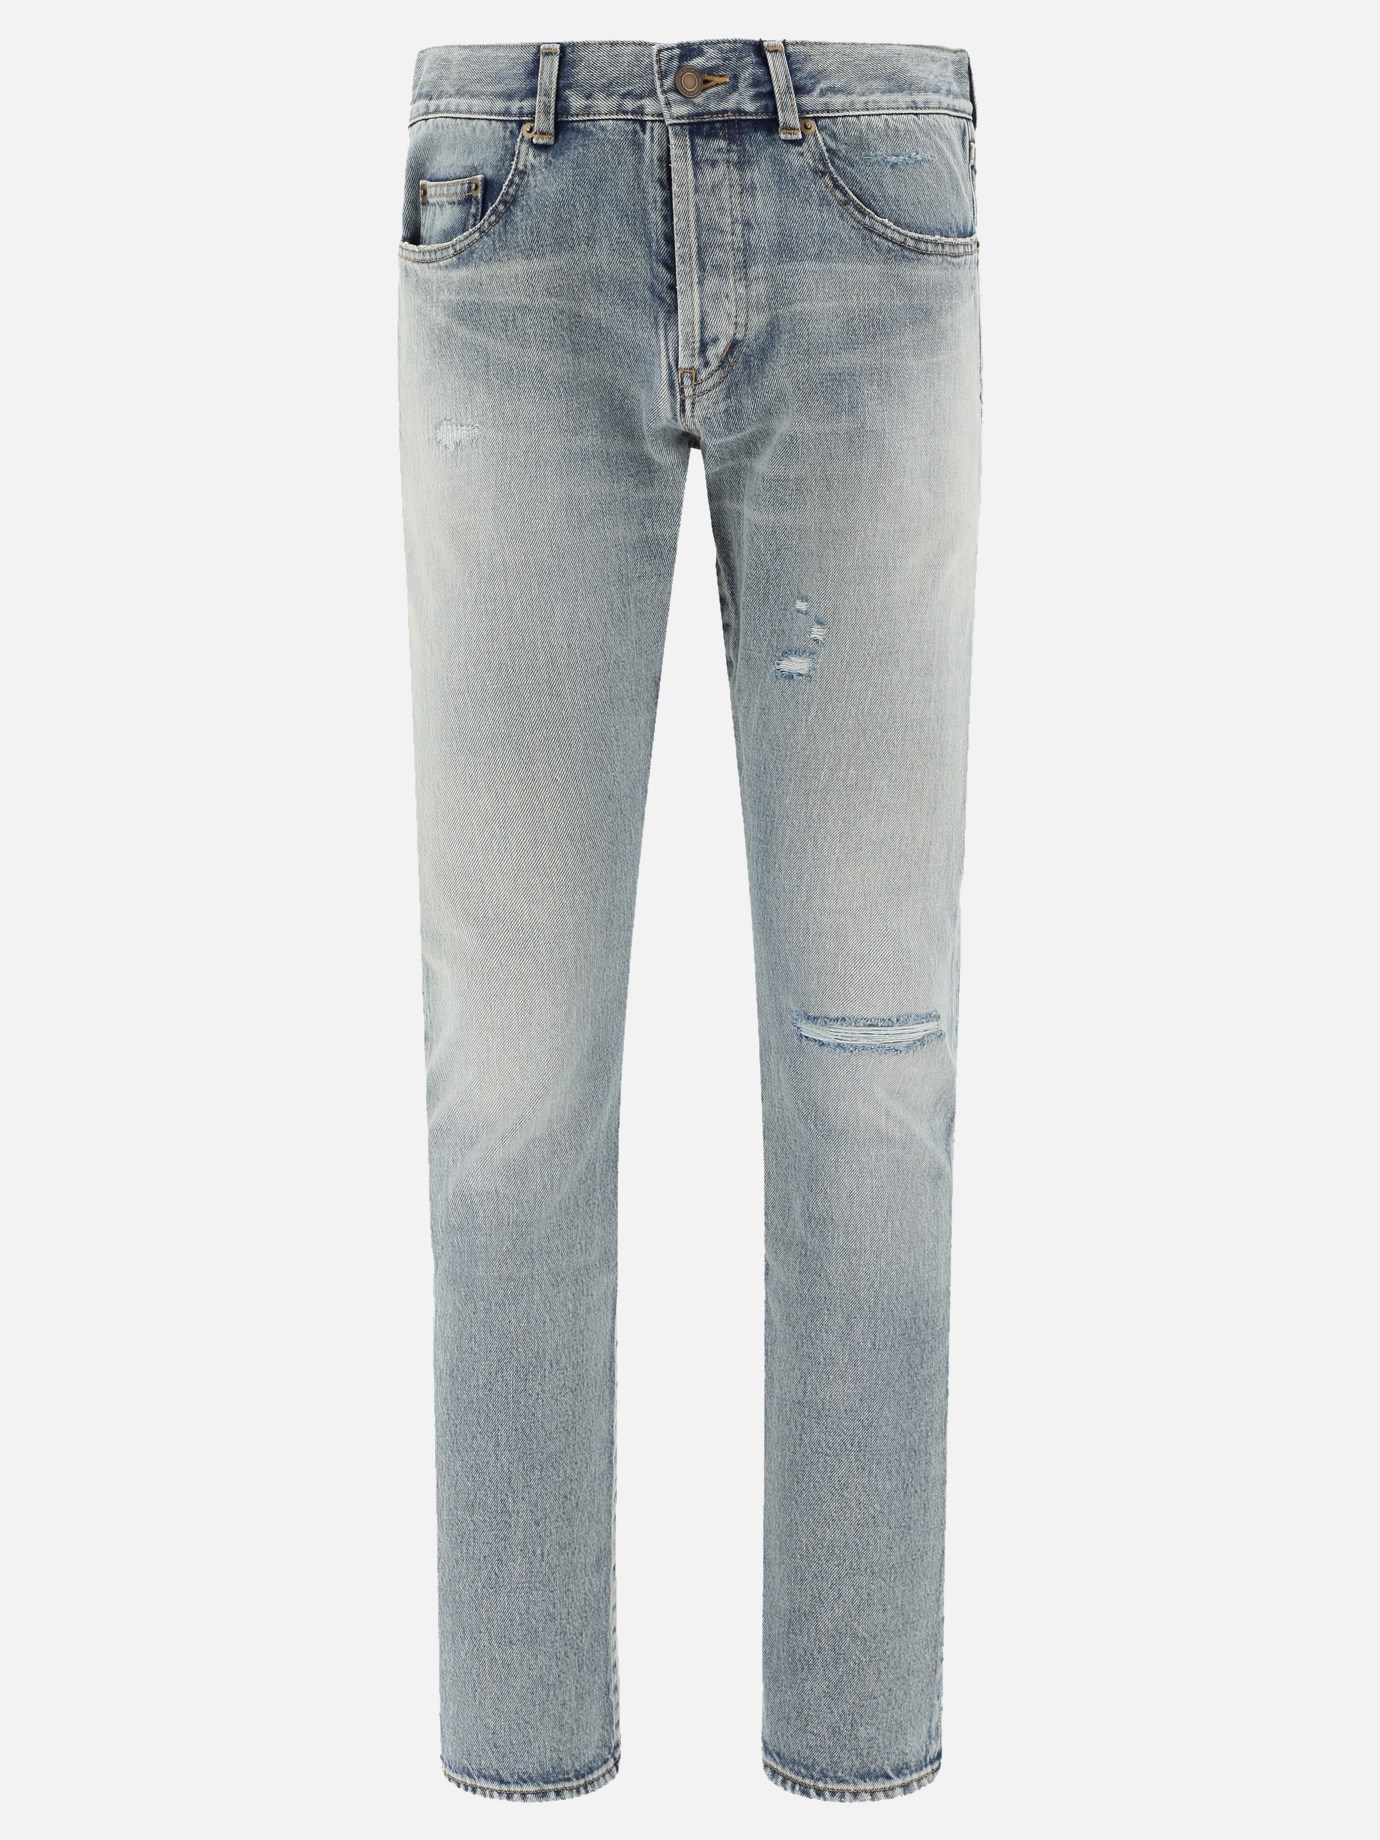 Distressed jeansby Saint Laurent - 4